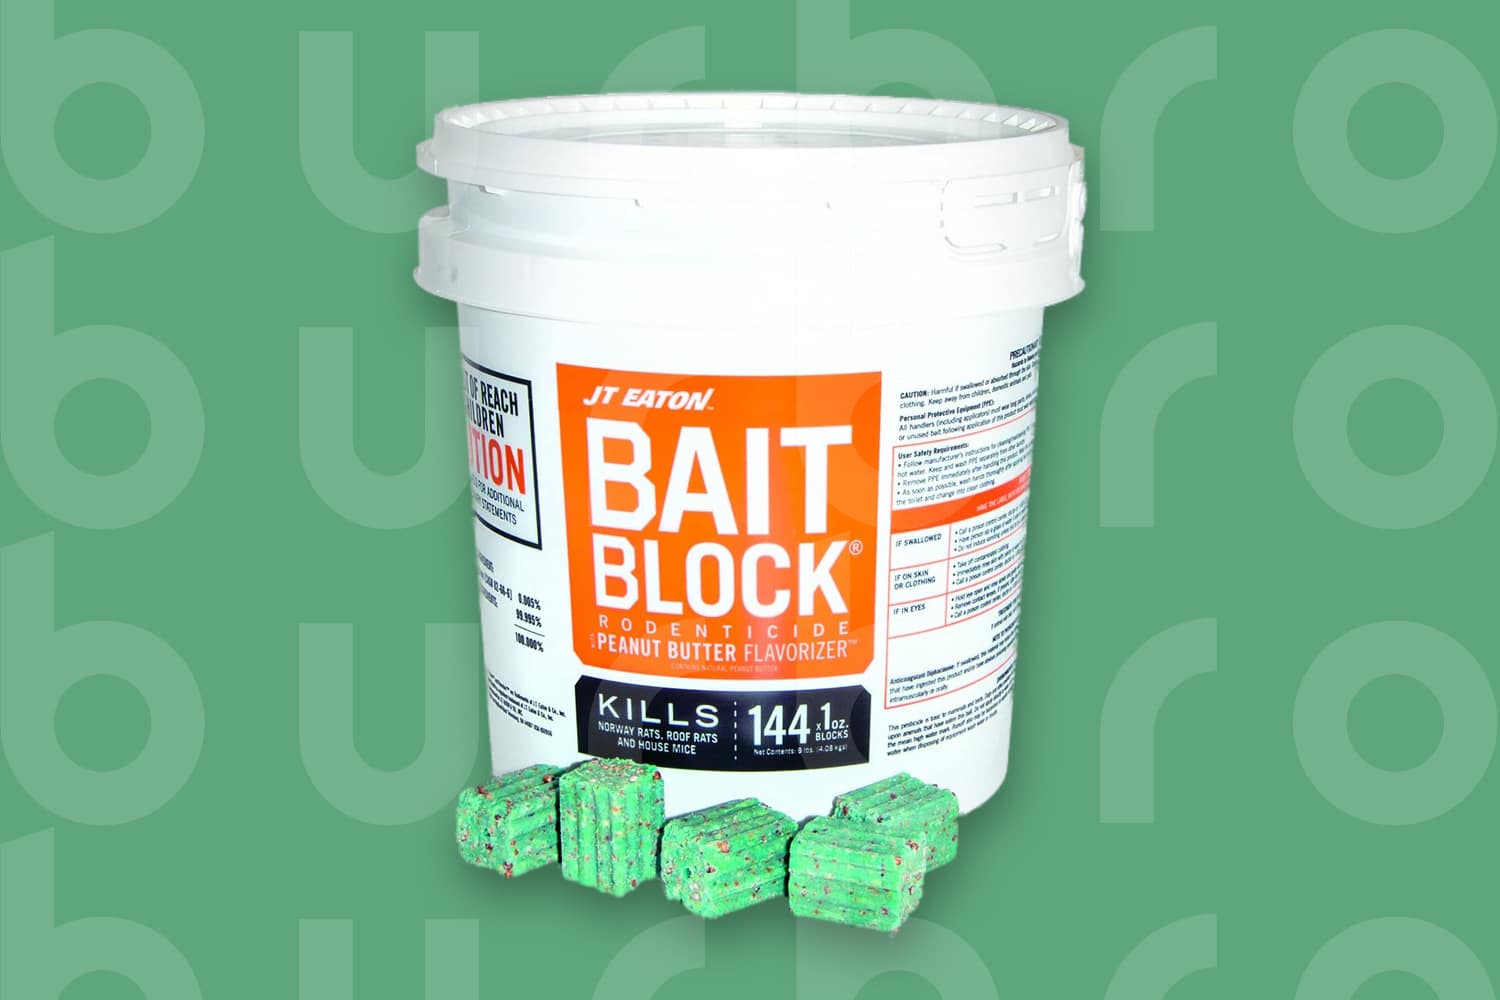 This is the cover photo for our Best Mouse Poison article. It features a bucket of JT Eaton Bait Block rodenticide overlaying a green background with an embossed Burbro logo.